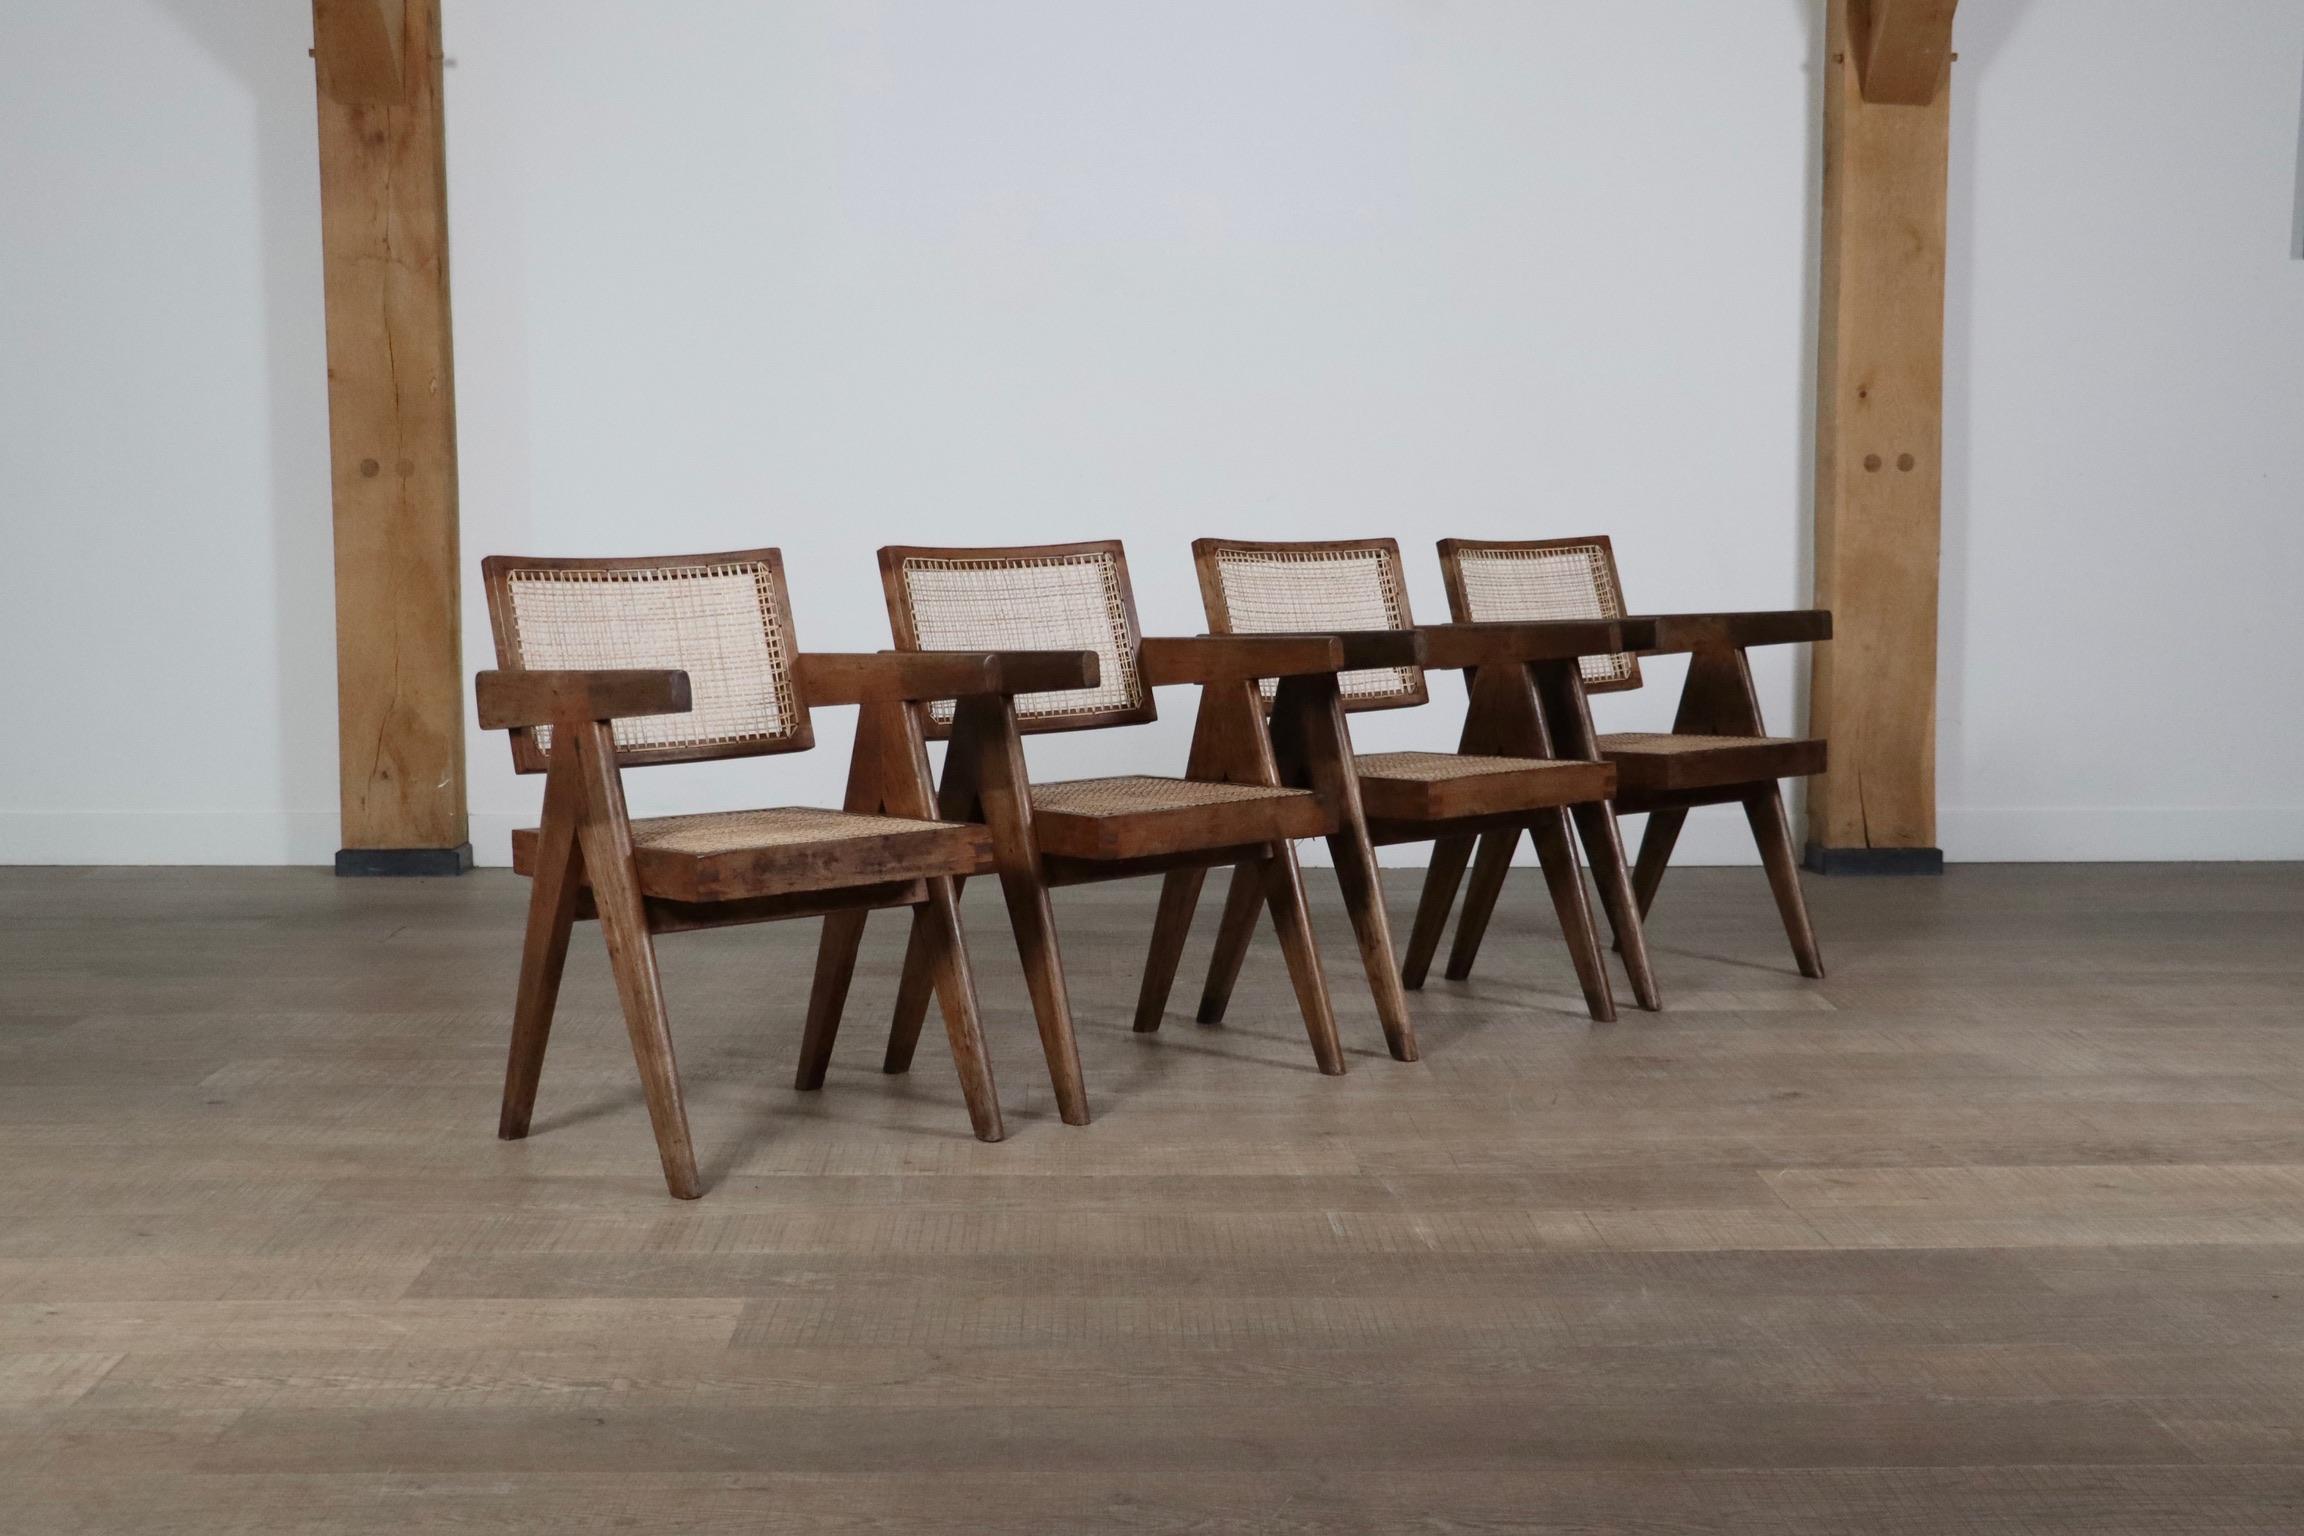 Pierre Jeanneret Office Cane chairs, India 1950s For Sale 7